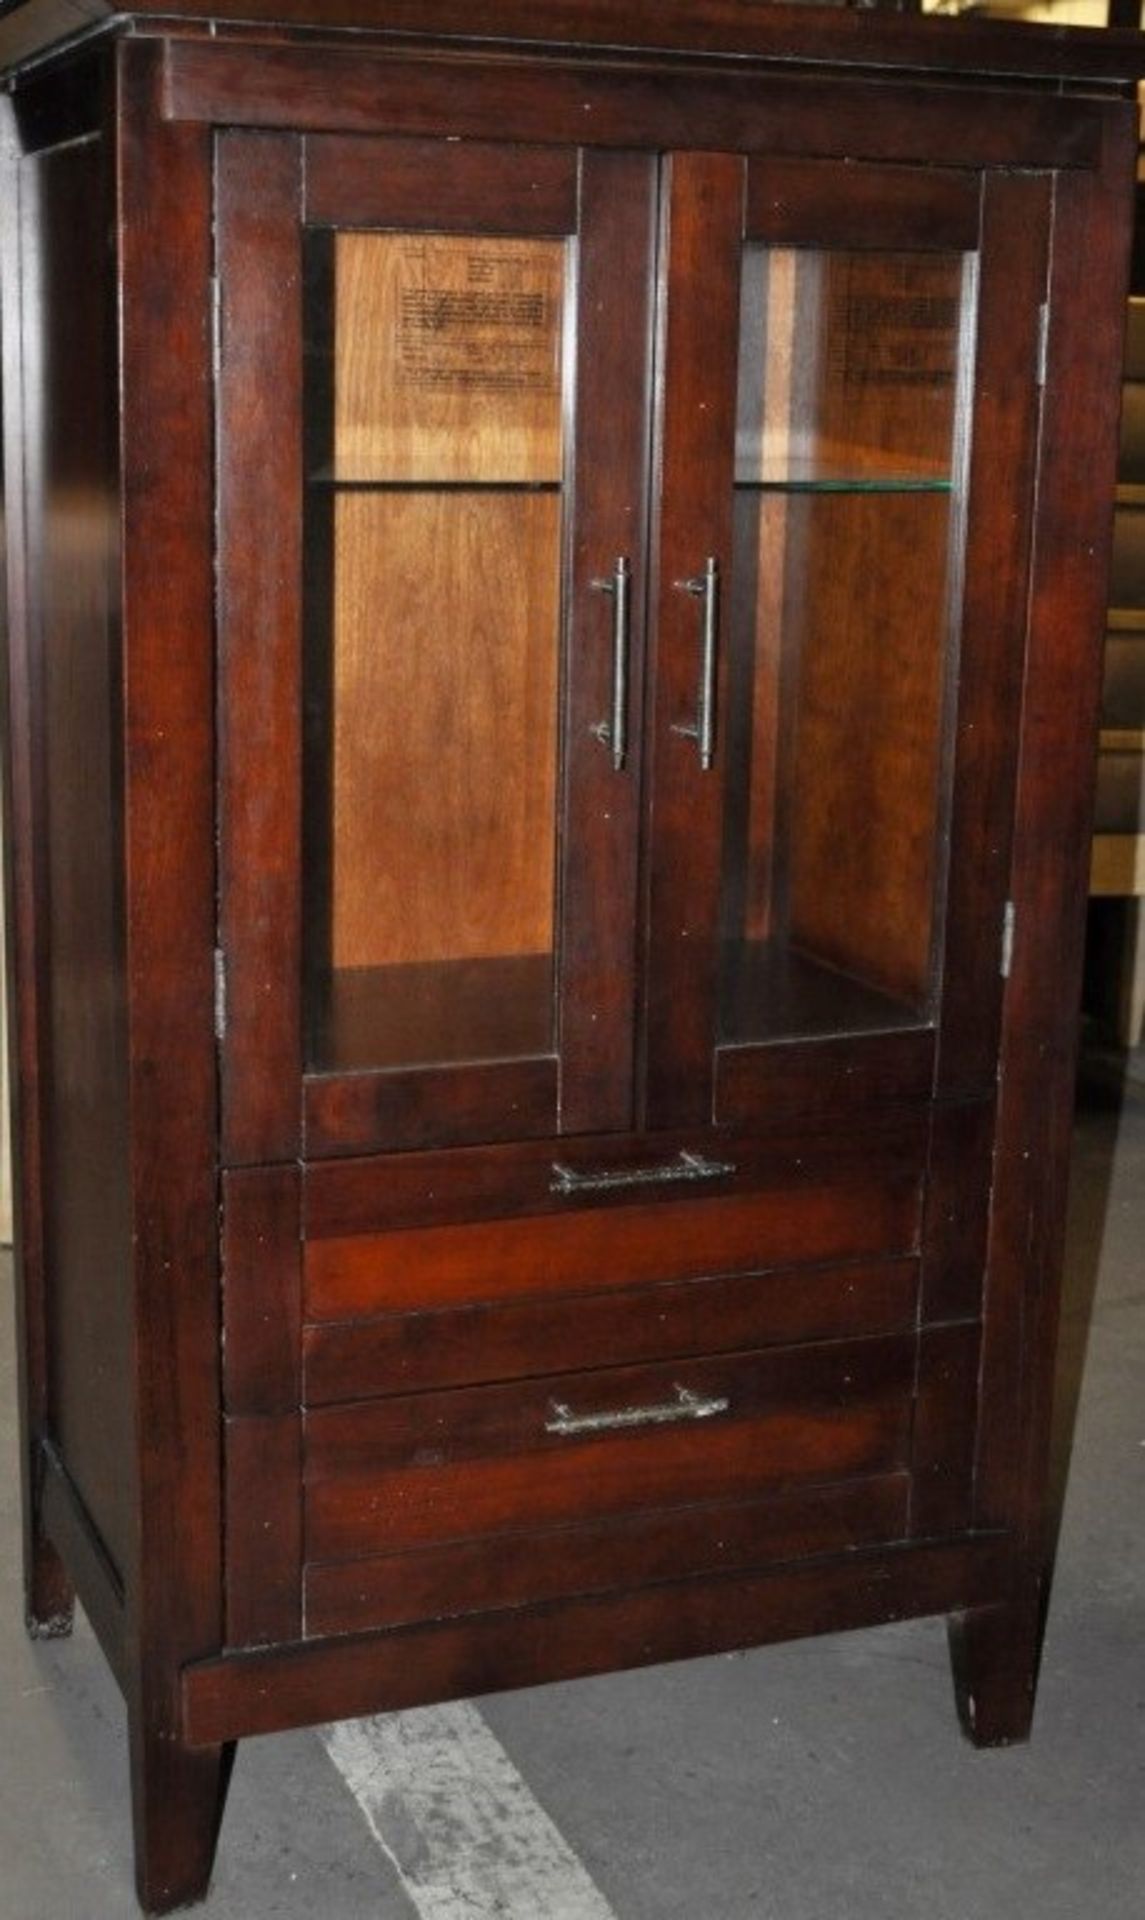 1 x Henley Traditional Red Mahogany Drinks Cabinet by Bentley Designs – Comes with Drawers & Glass